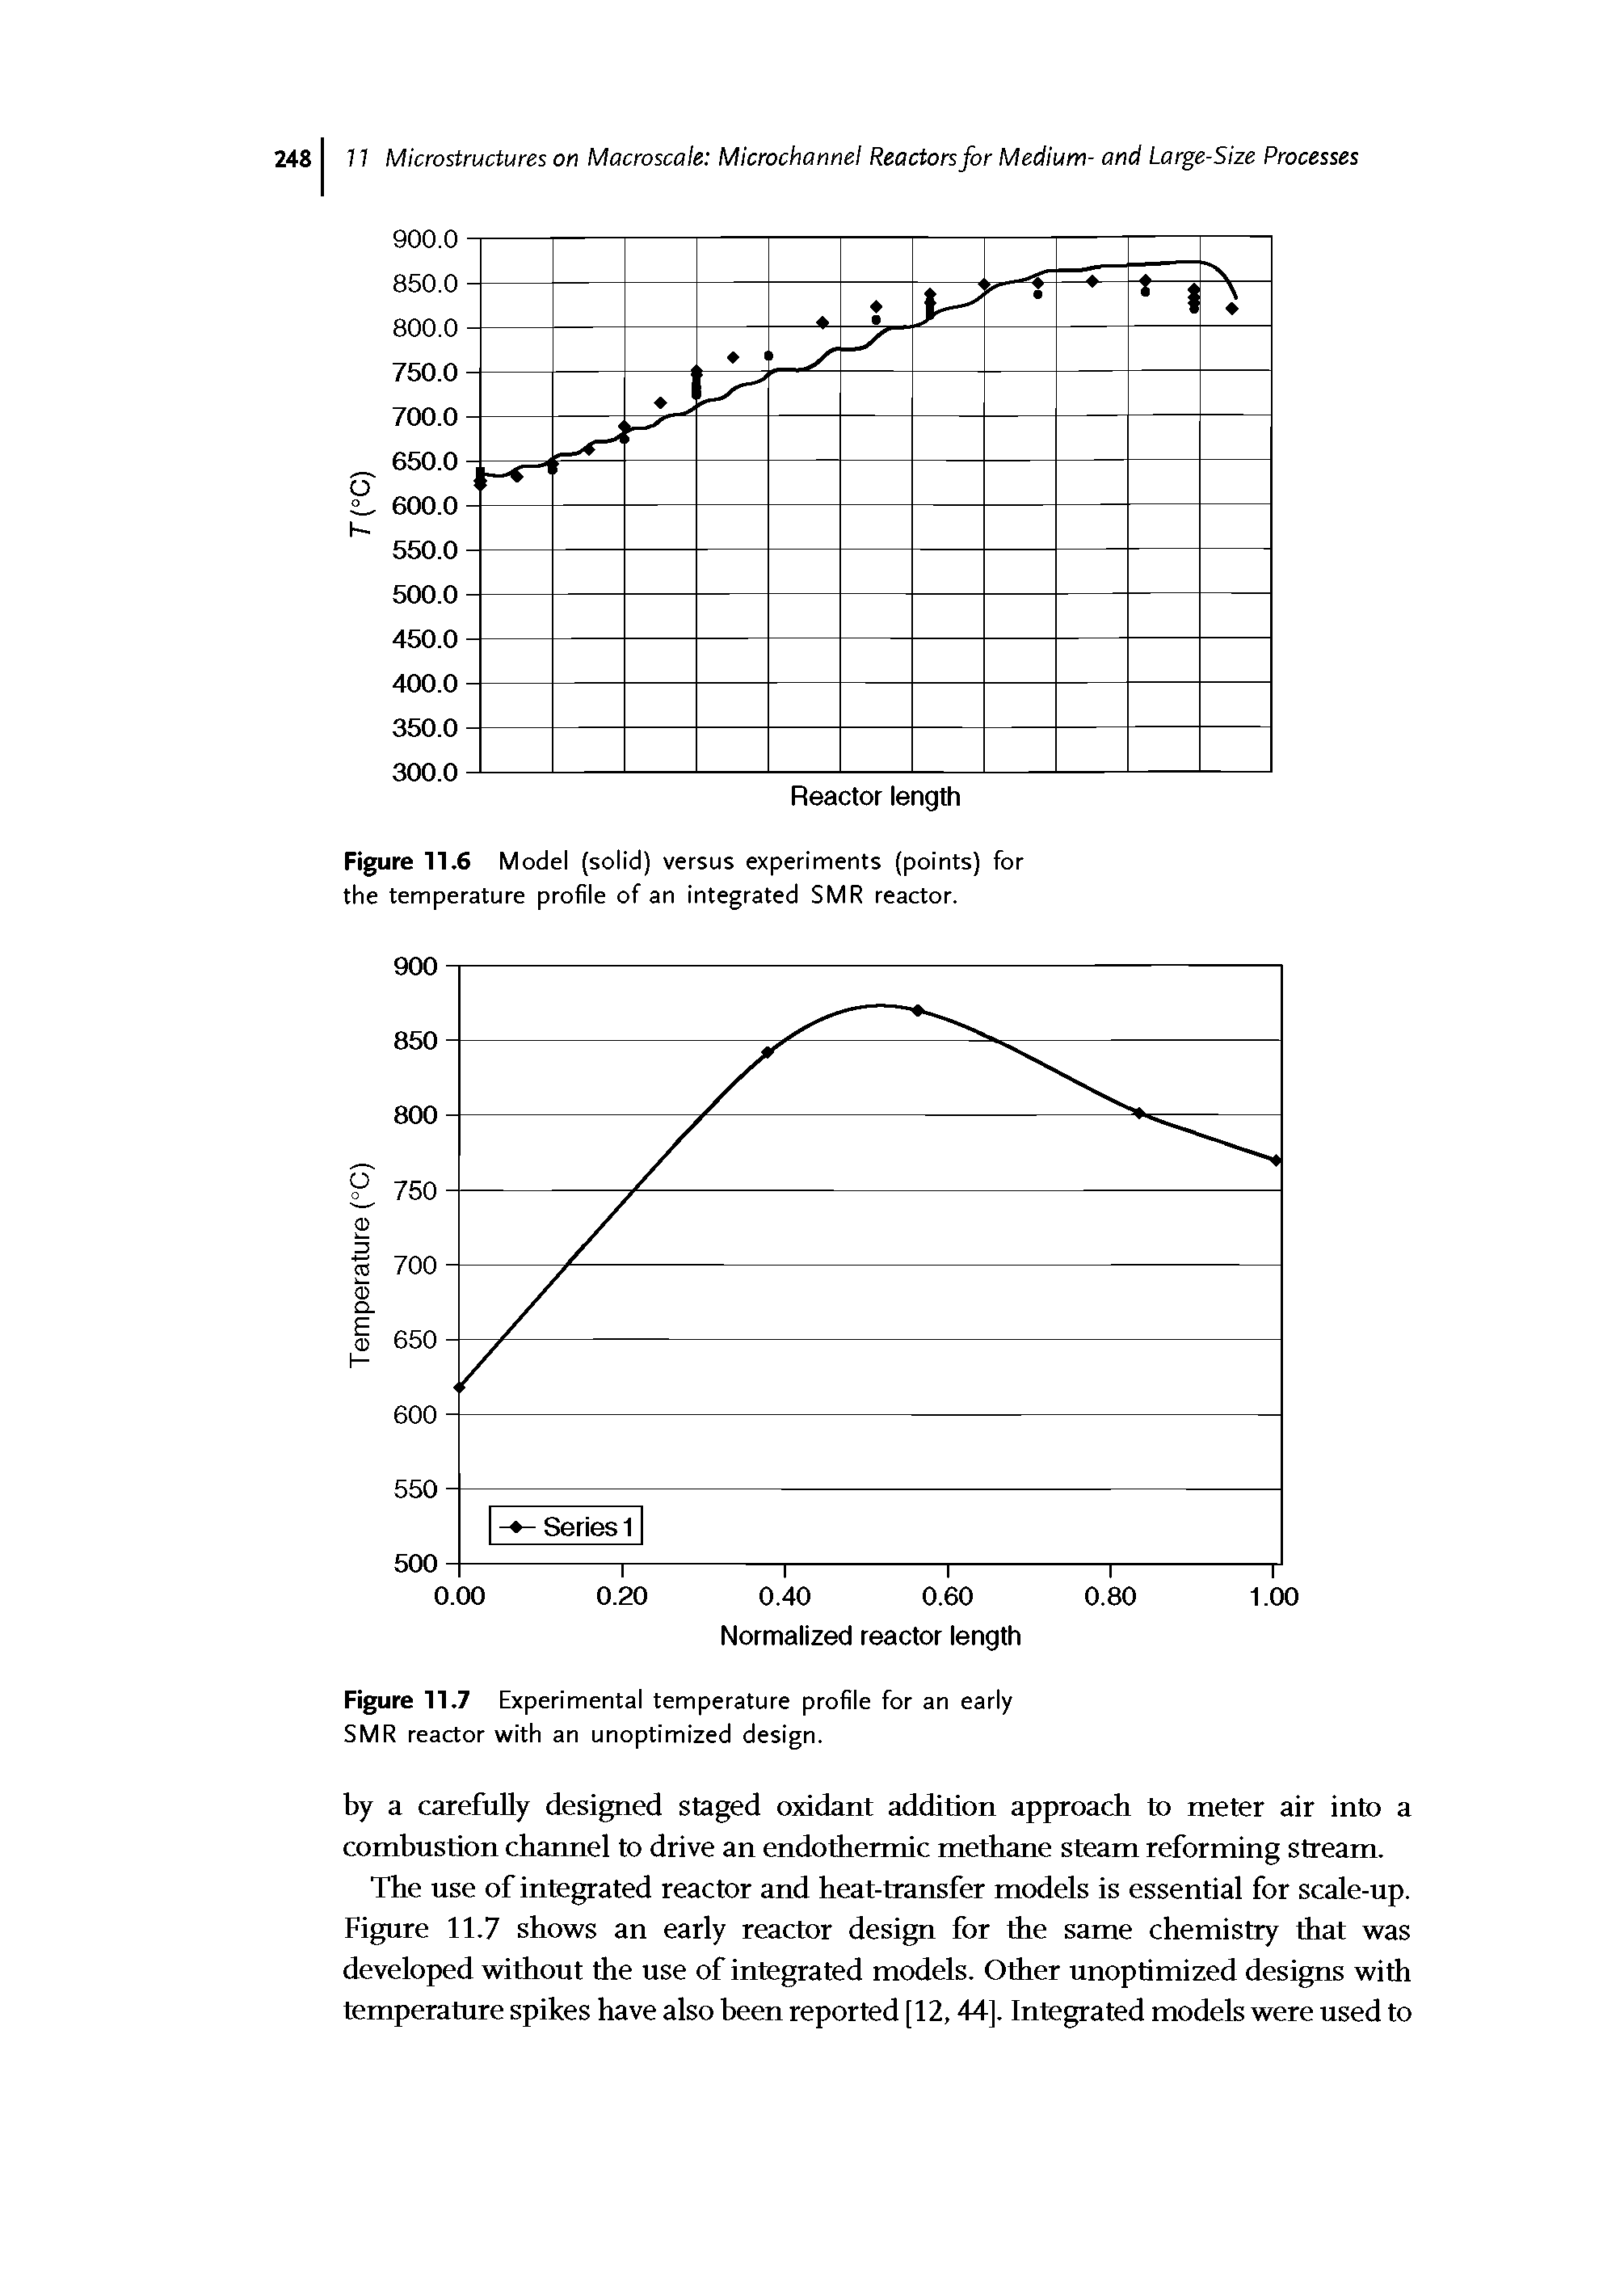 Figure 11.6 Model (solid) versus experiments (points) for the temperature profile of an integrated SMR reactor.